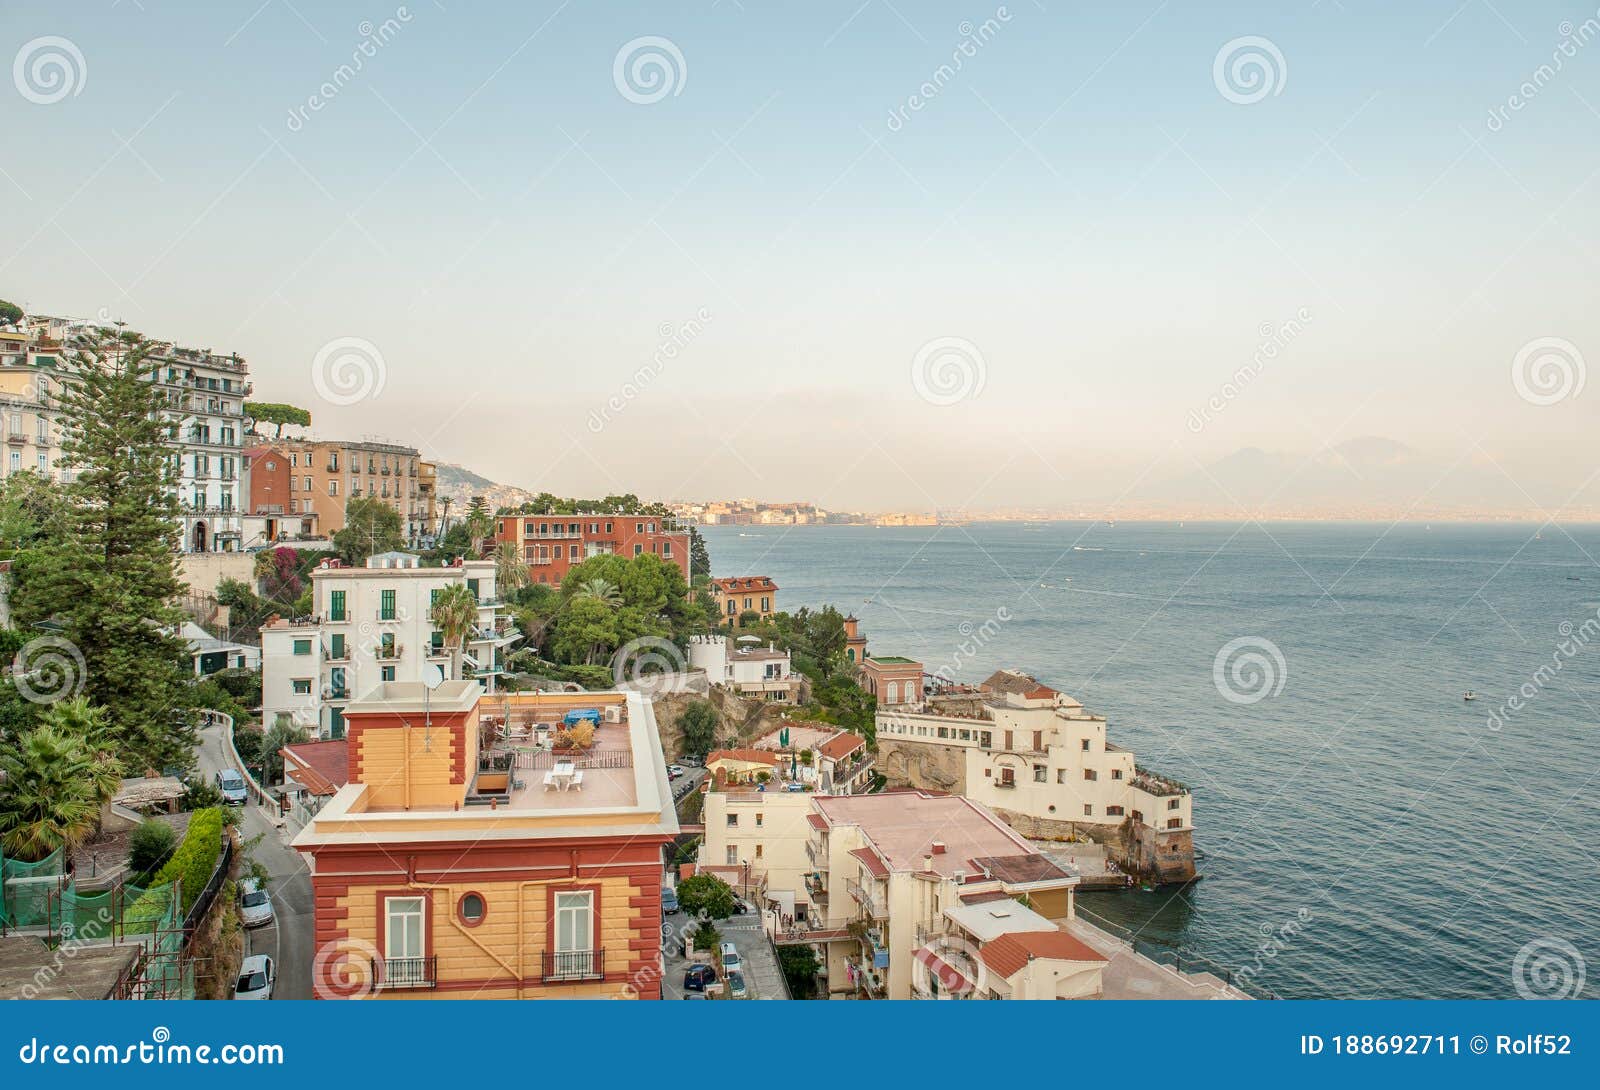 naples and the gulf of naples